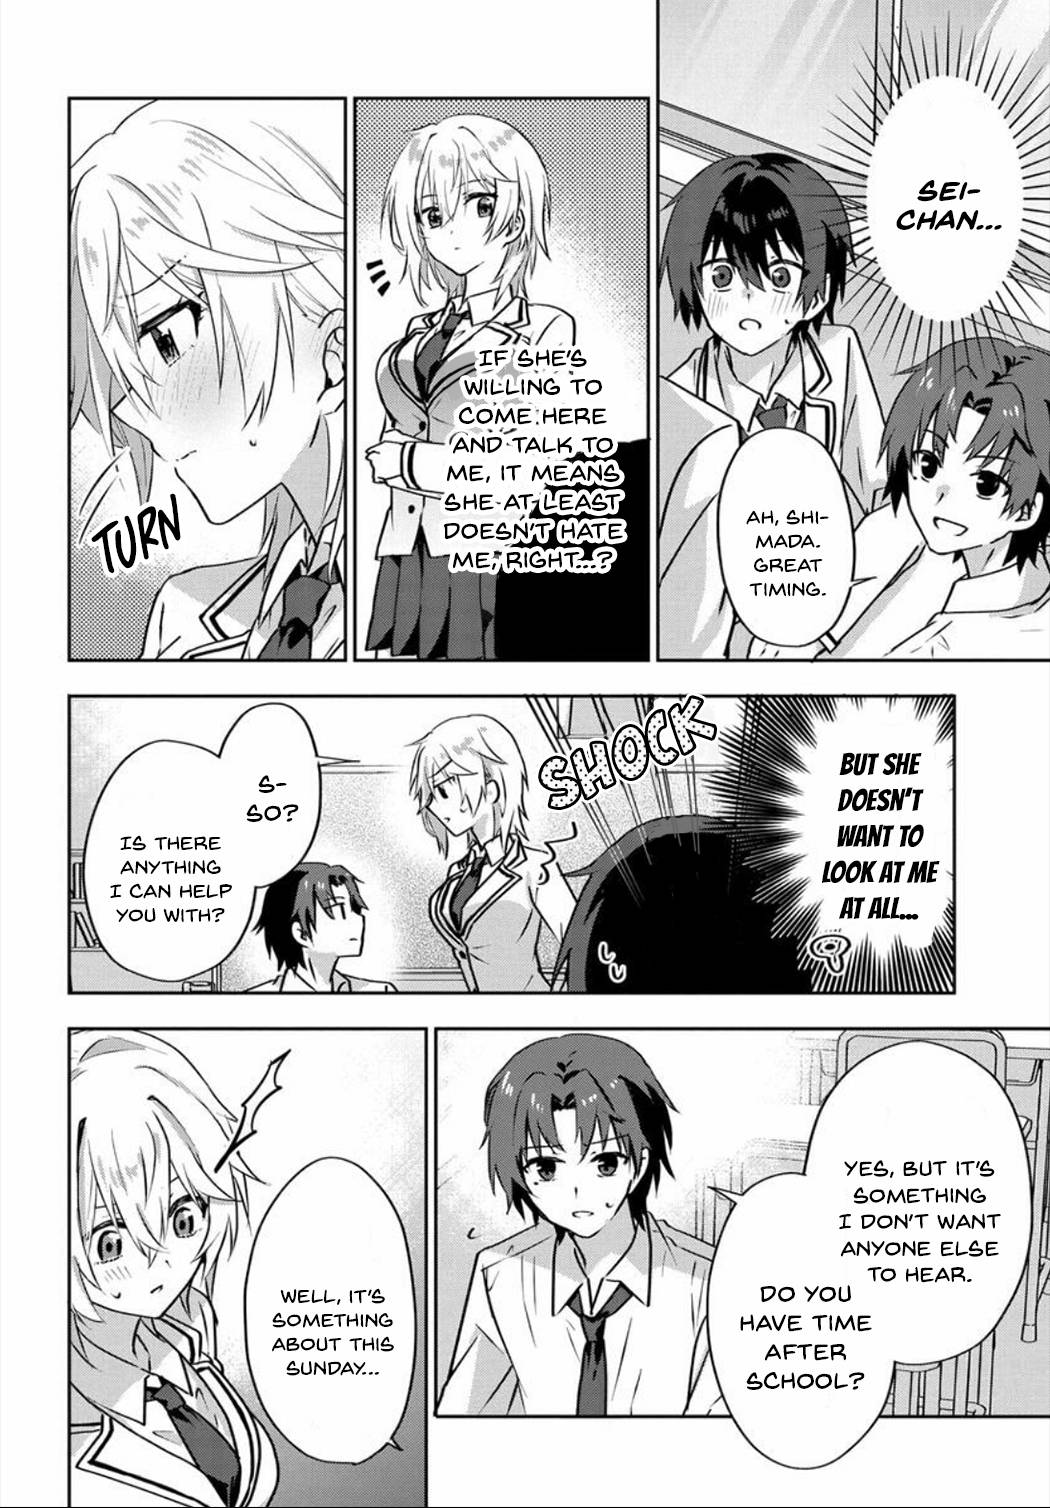 Since I’ve Entered the World of Romantic Comedy Manga, I’ll Do My Best to Make the Losing Heroine Happy. - chapter 3.2 - #5